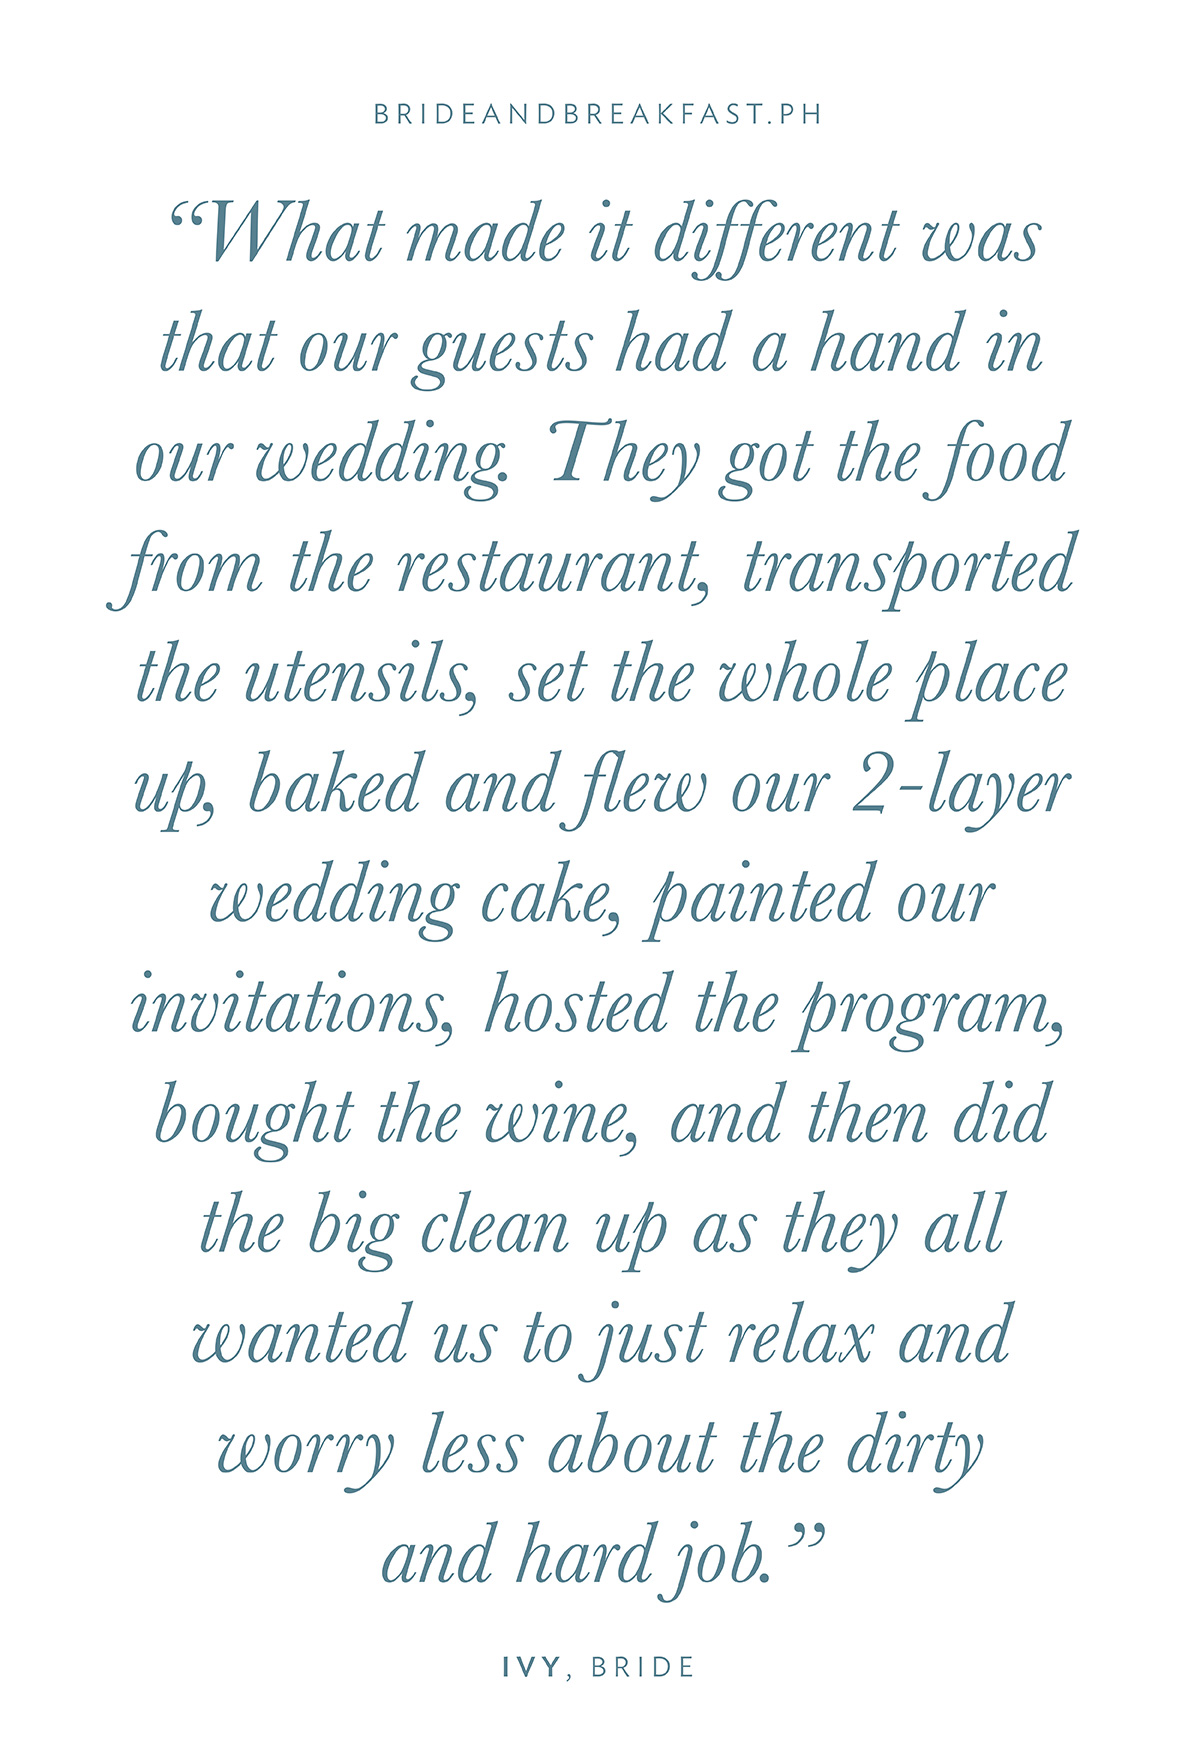 “What made it different was that our guests had a hand in our wedding. They got the food from the restaurant, transported the utensils, set the whole place up, baked and flew our 2-layer wedding cake, painted our invitations, hosted the program, bought the wine, and then did the big clean up as they all wanted us to just relax and worry less about the dirty and hard job.”